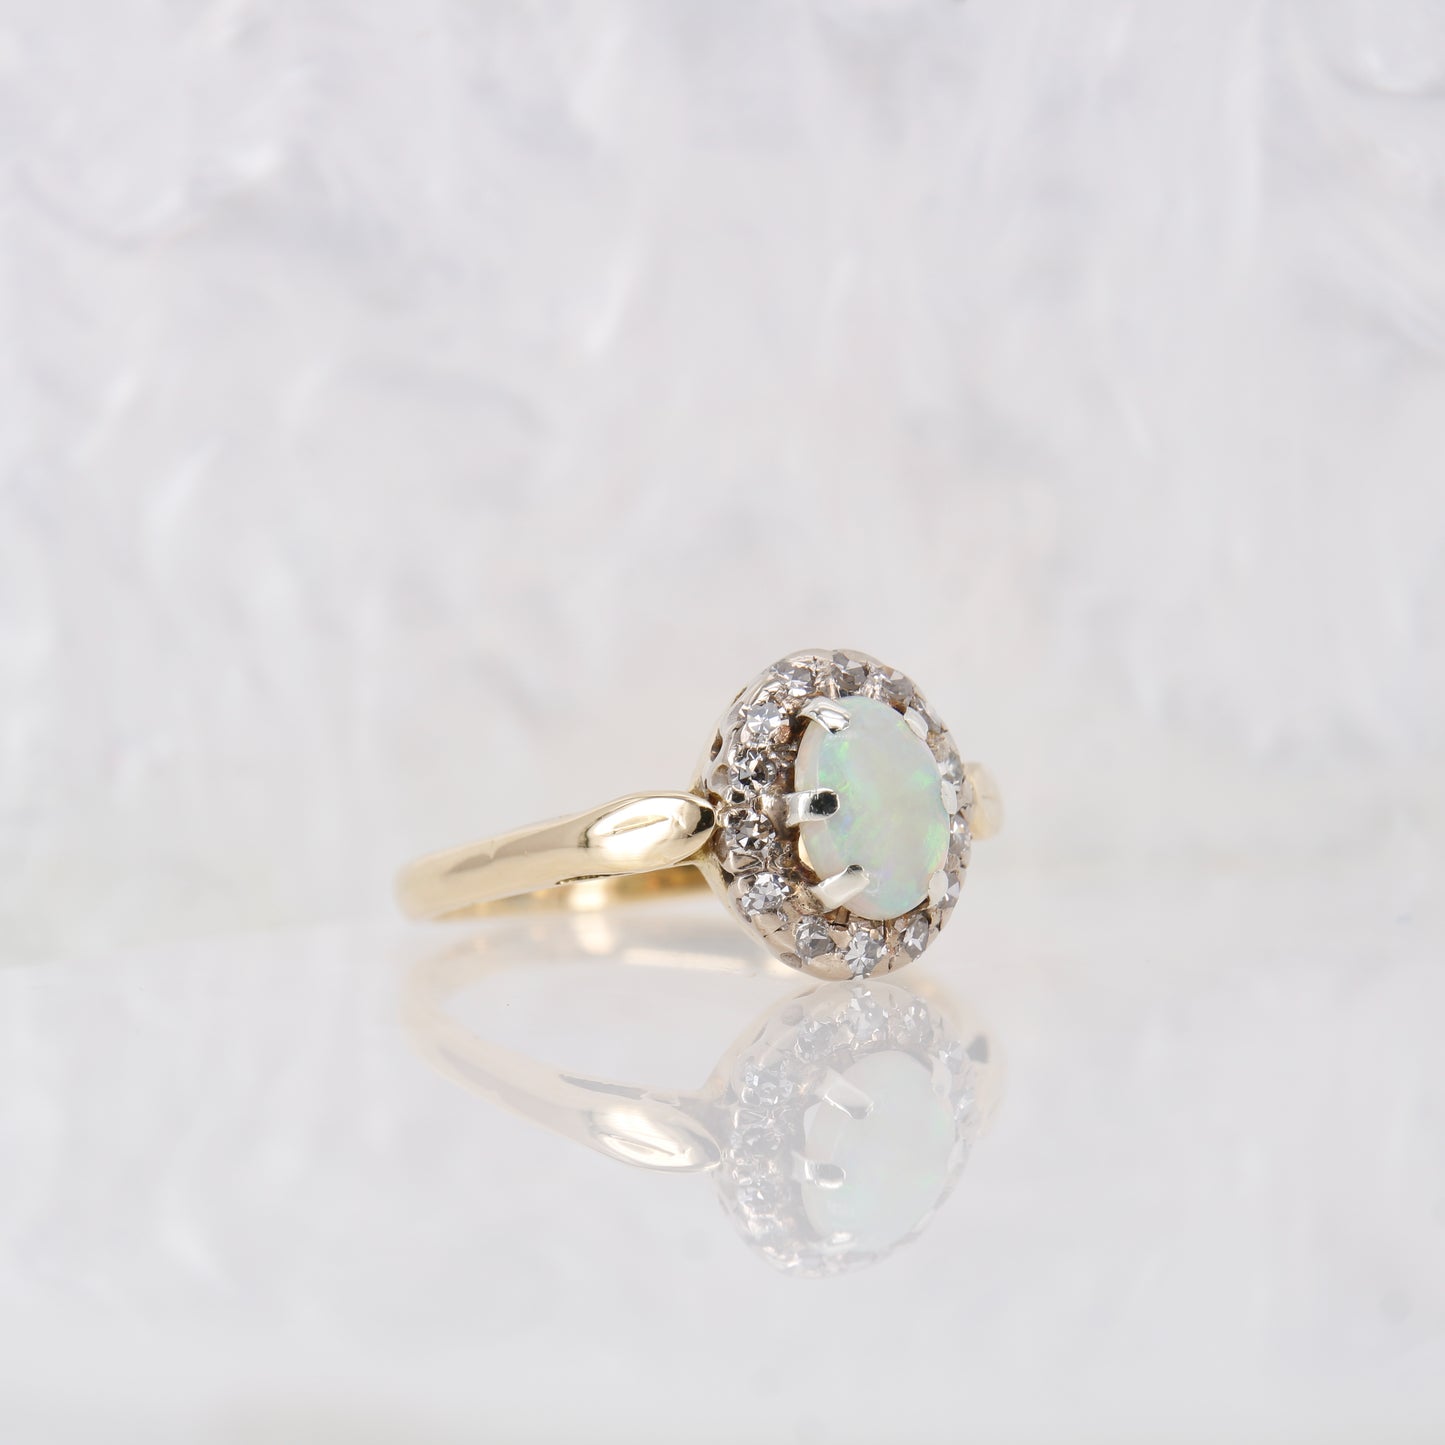 Vintage Opal and Diamond Ring, Antique Opal and Diamond Halo Ring 18ct Yellow Gold.